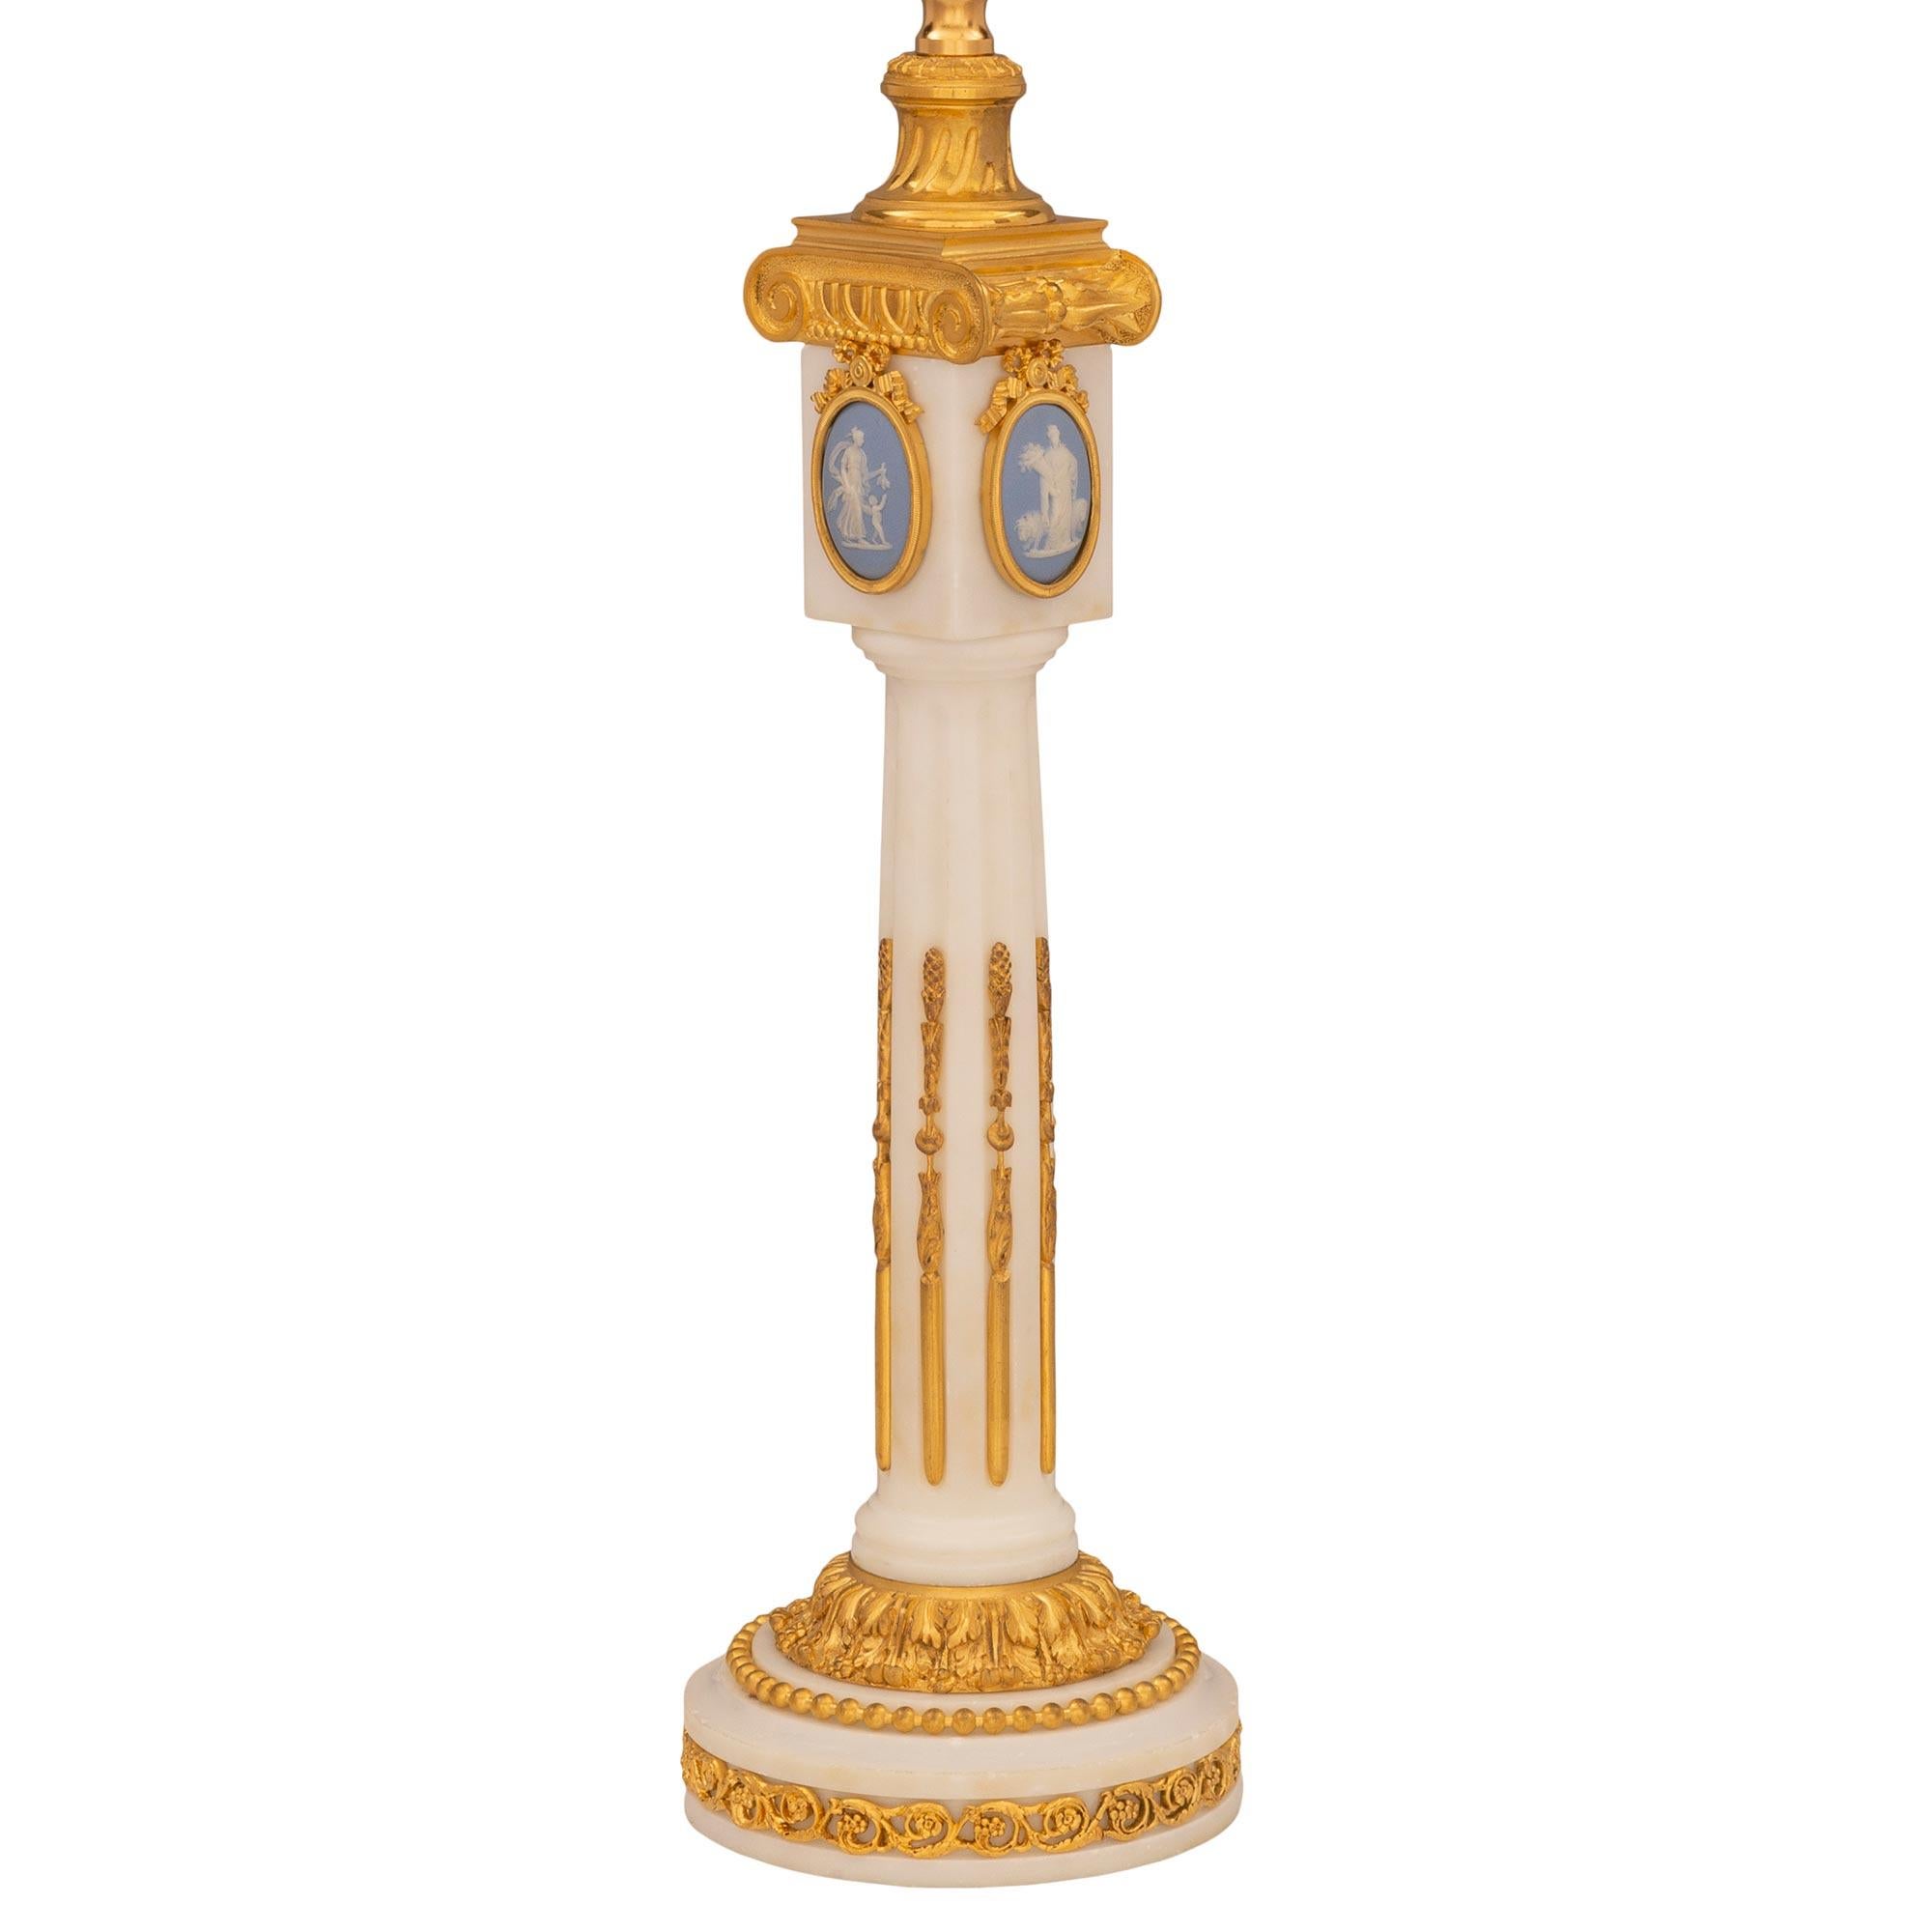 A most elegant French 19th century Louis XVI st. white Carrara marble, ormolu, and Wedgwood lamp. The lamp is raised by a circular base decorated with a beautiful fitted pierced Rinceau shaped scrolled foliate ormolu band and a lovely foliate wrap